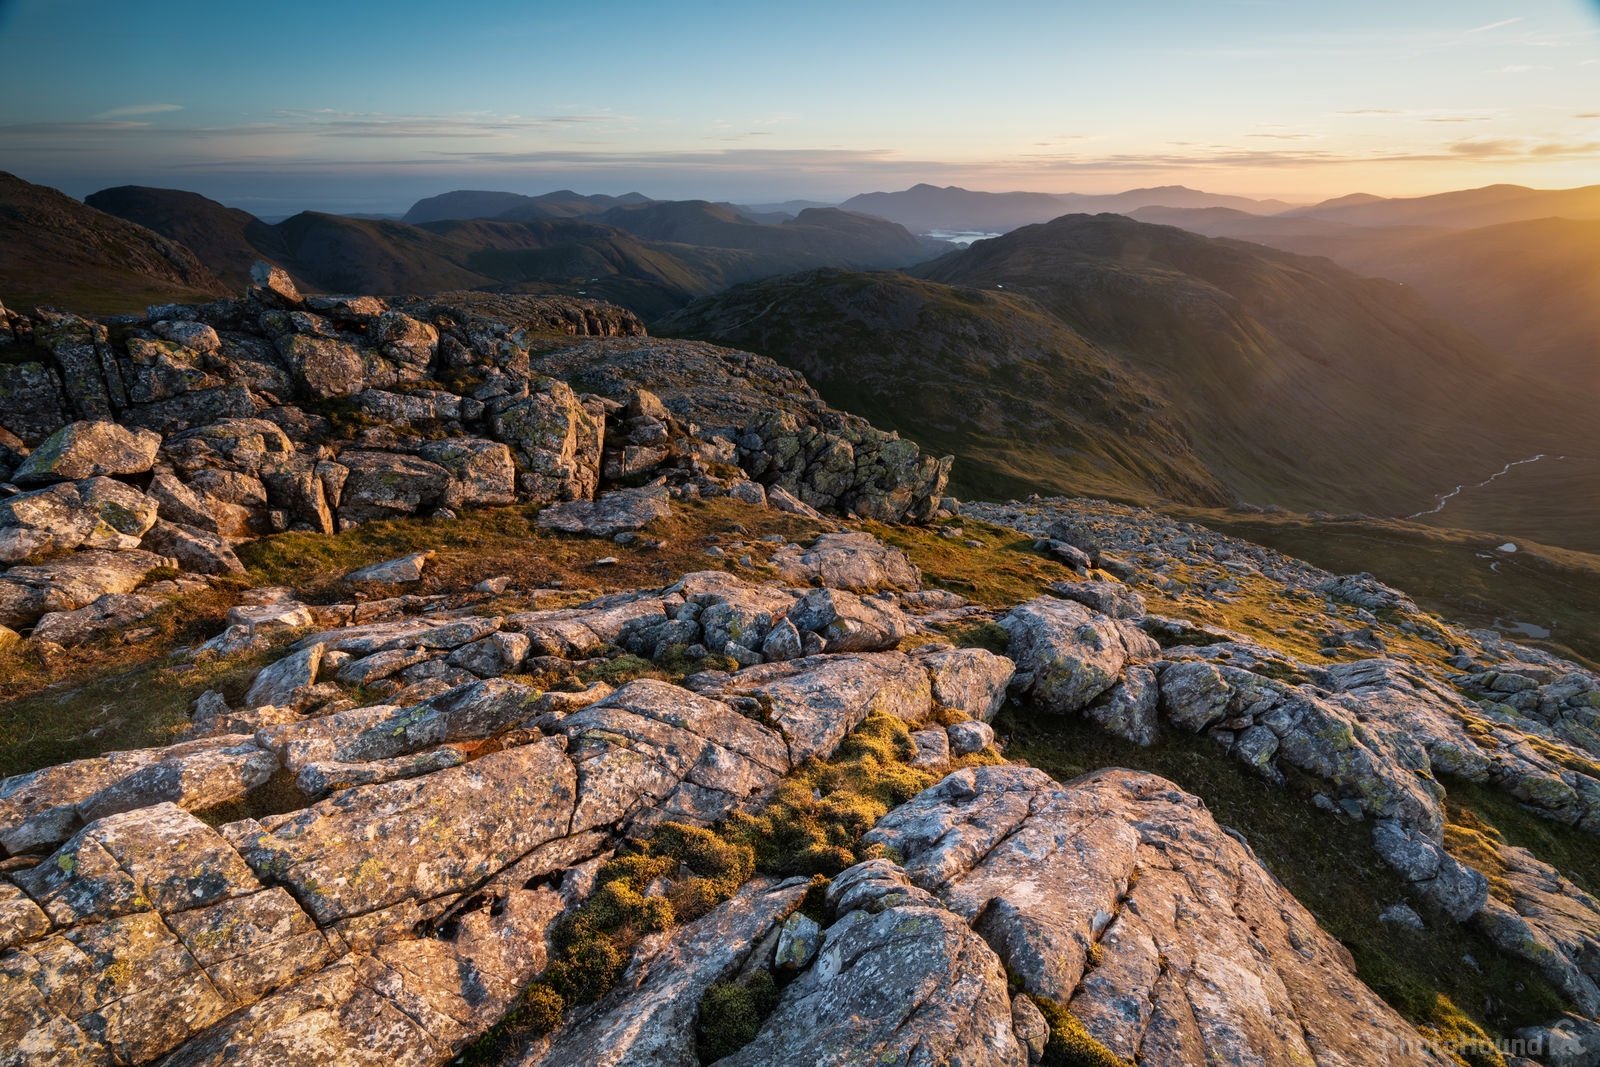 Image of Esk Pike, Lake District by Richard Lizzimore